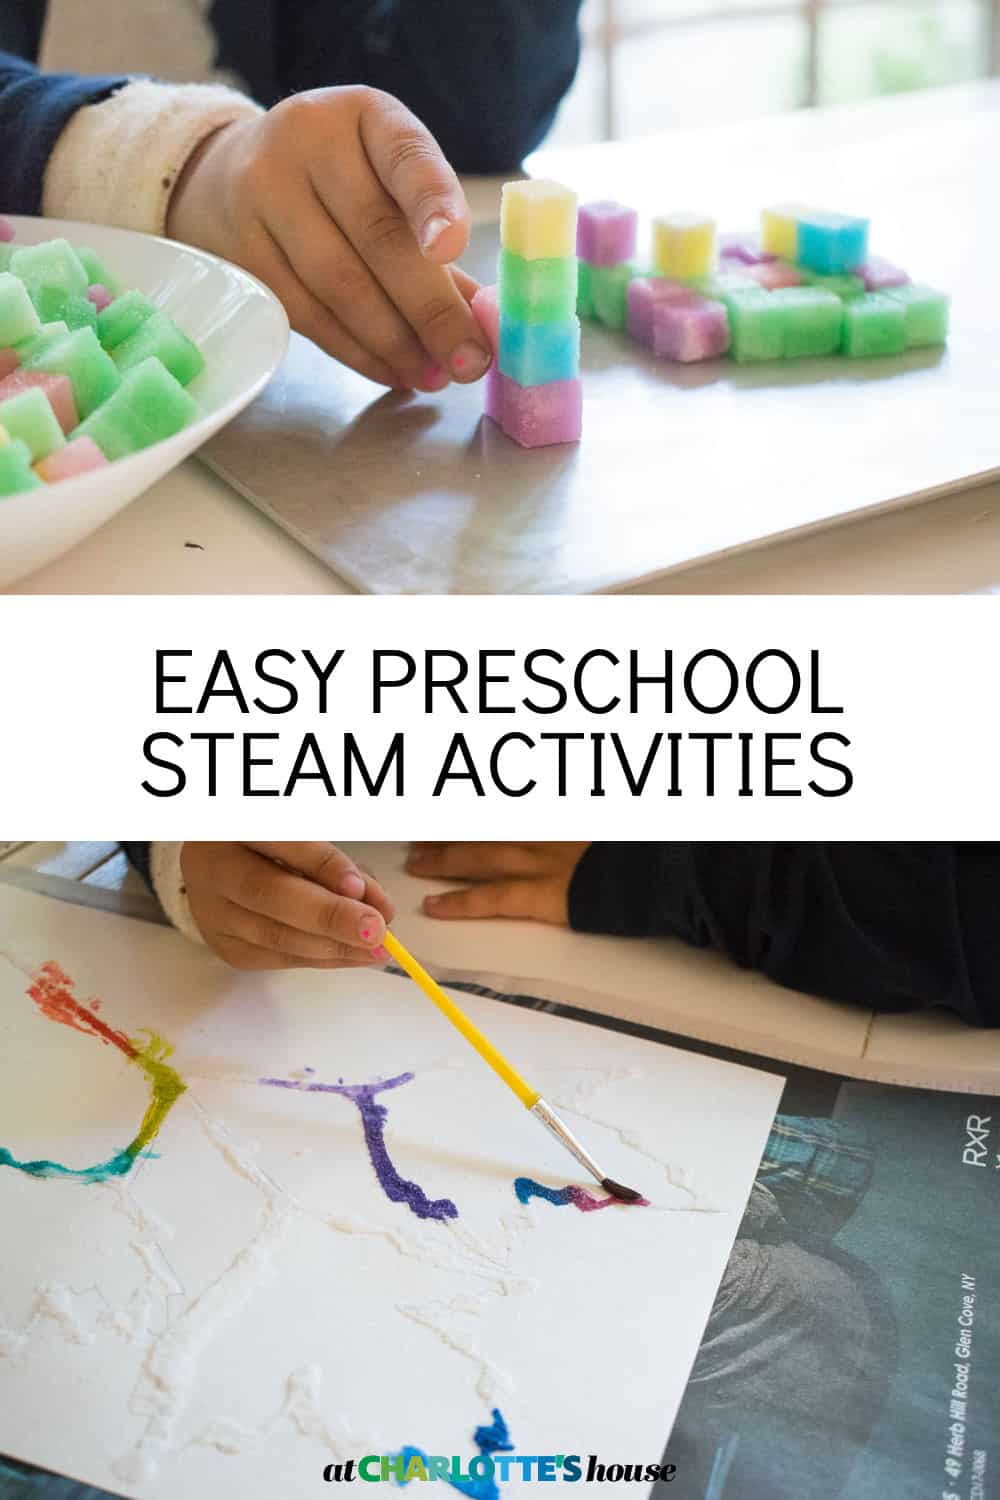 EASY PRESCHOOL STEAM ACTIVITIES - At Charlotte's House